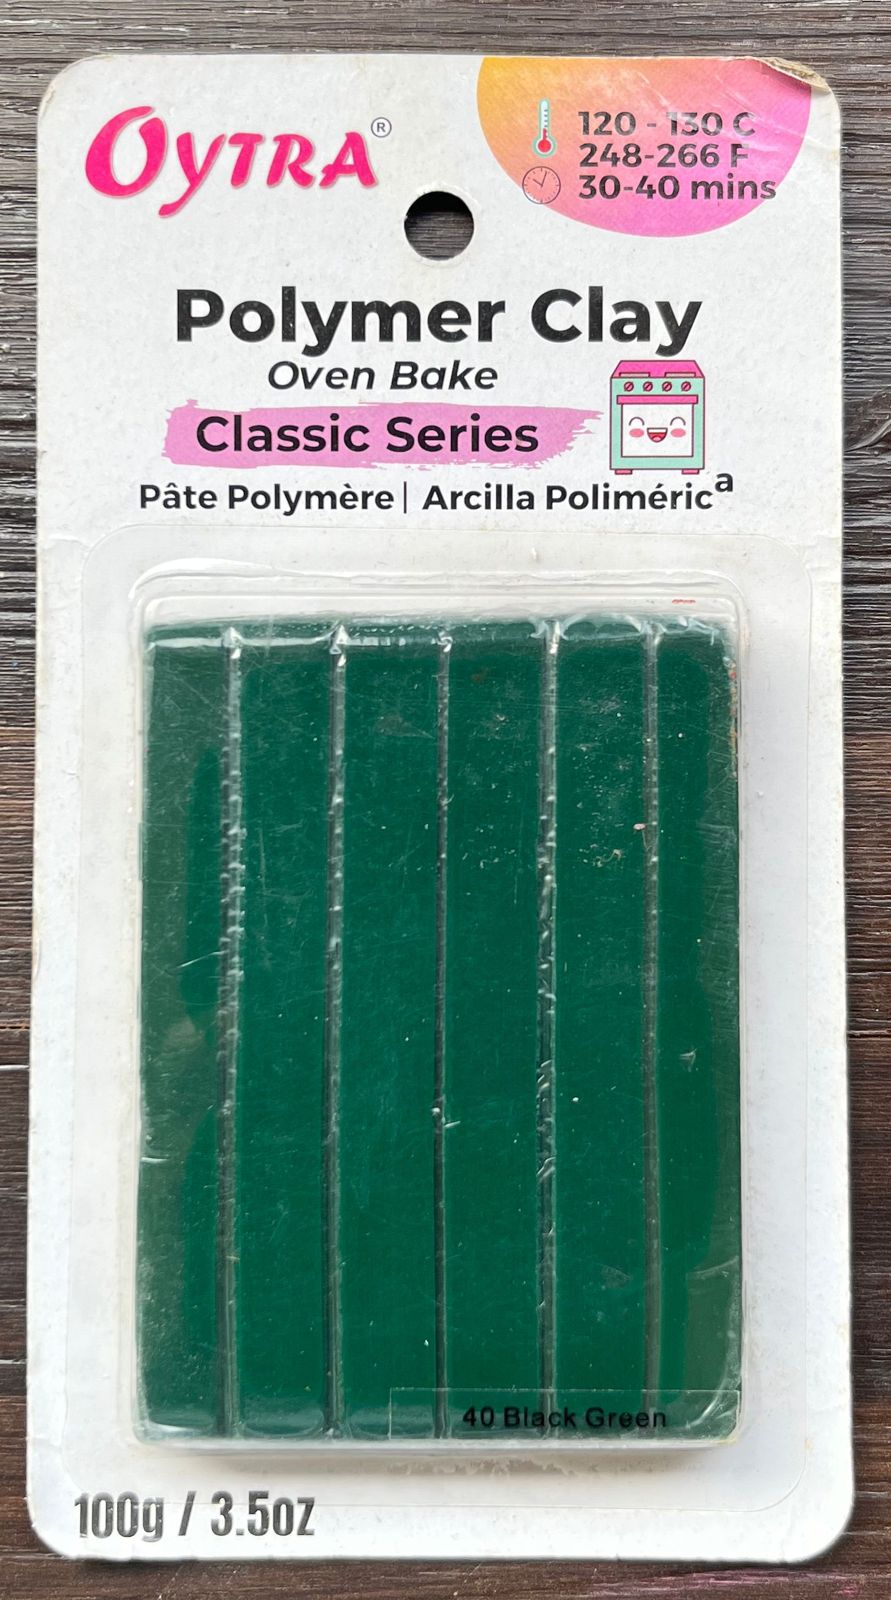 Polymer Clay Oven Bake Classic Series Black Green 40